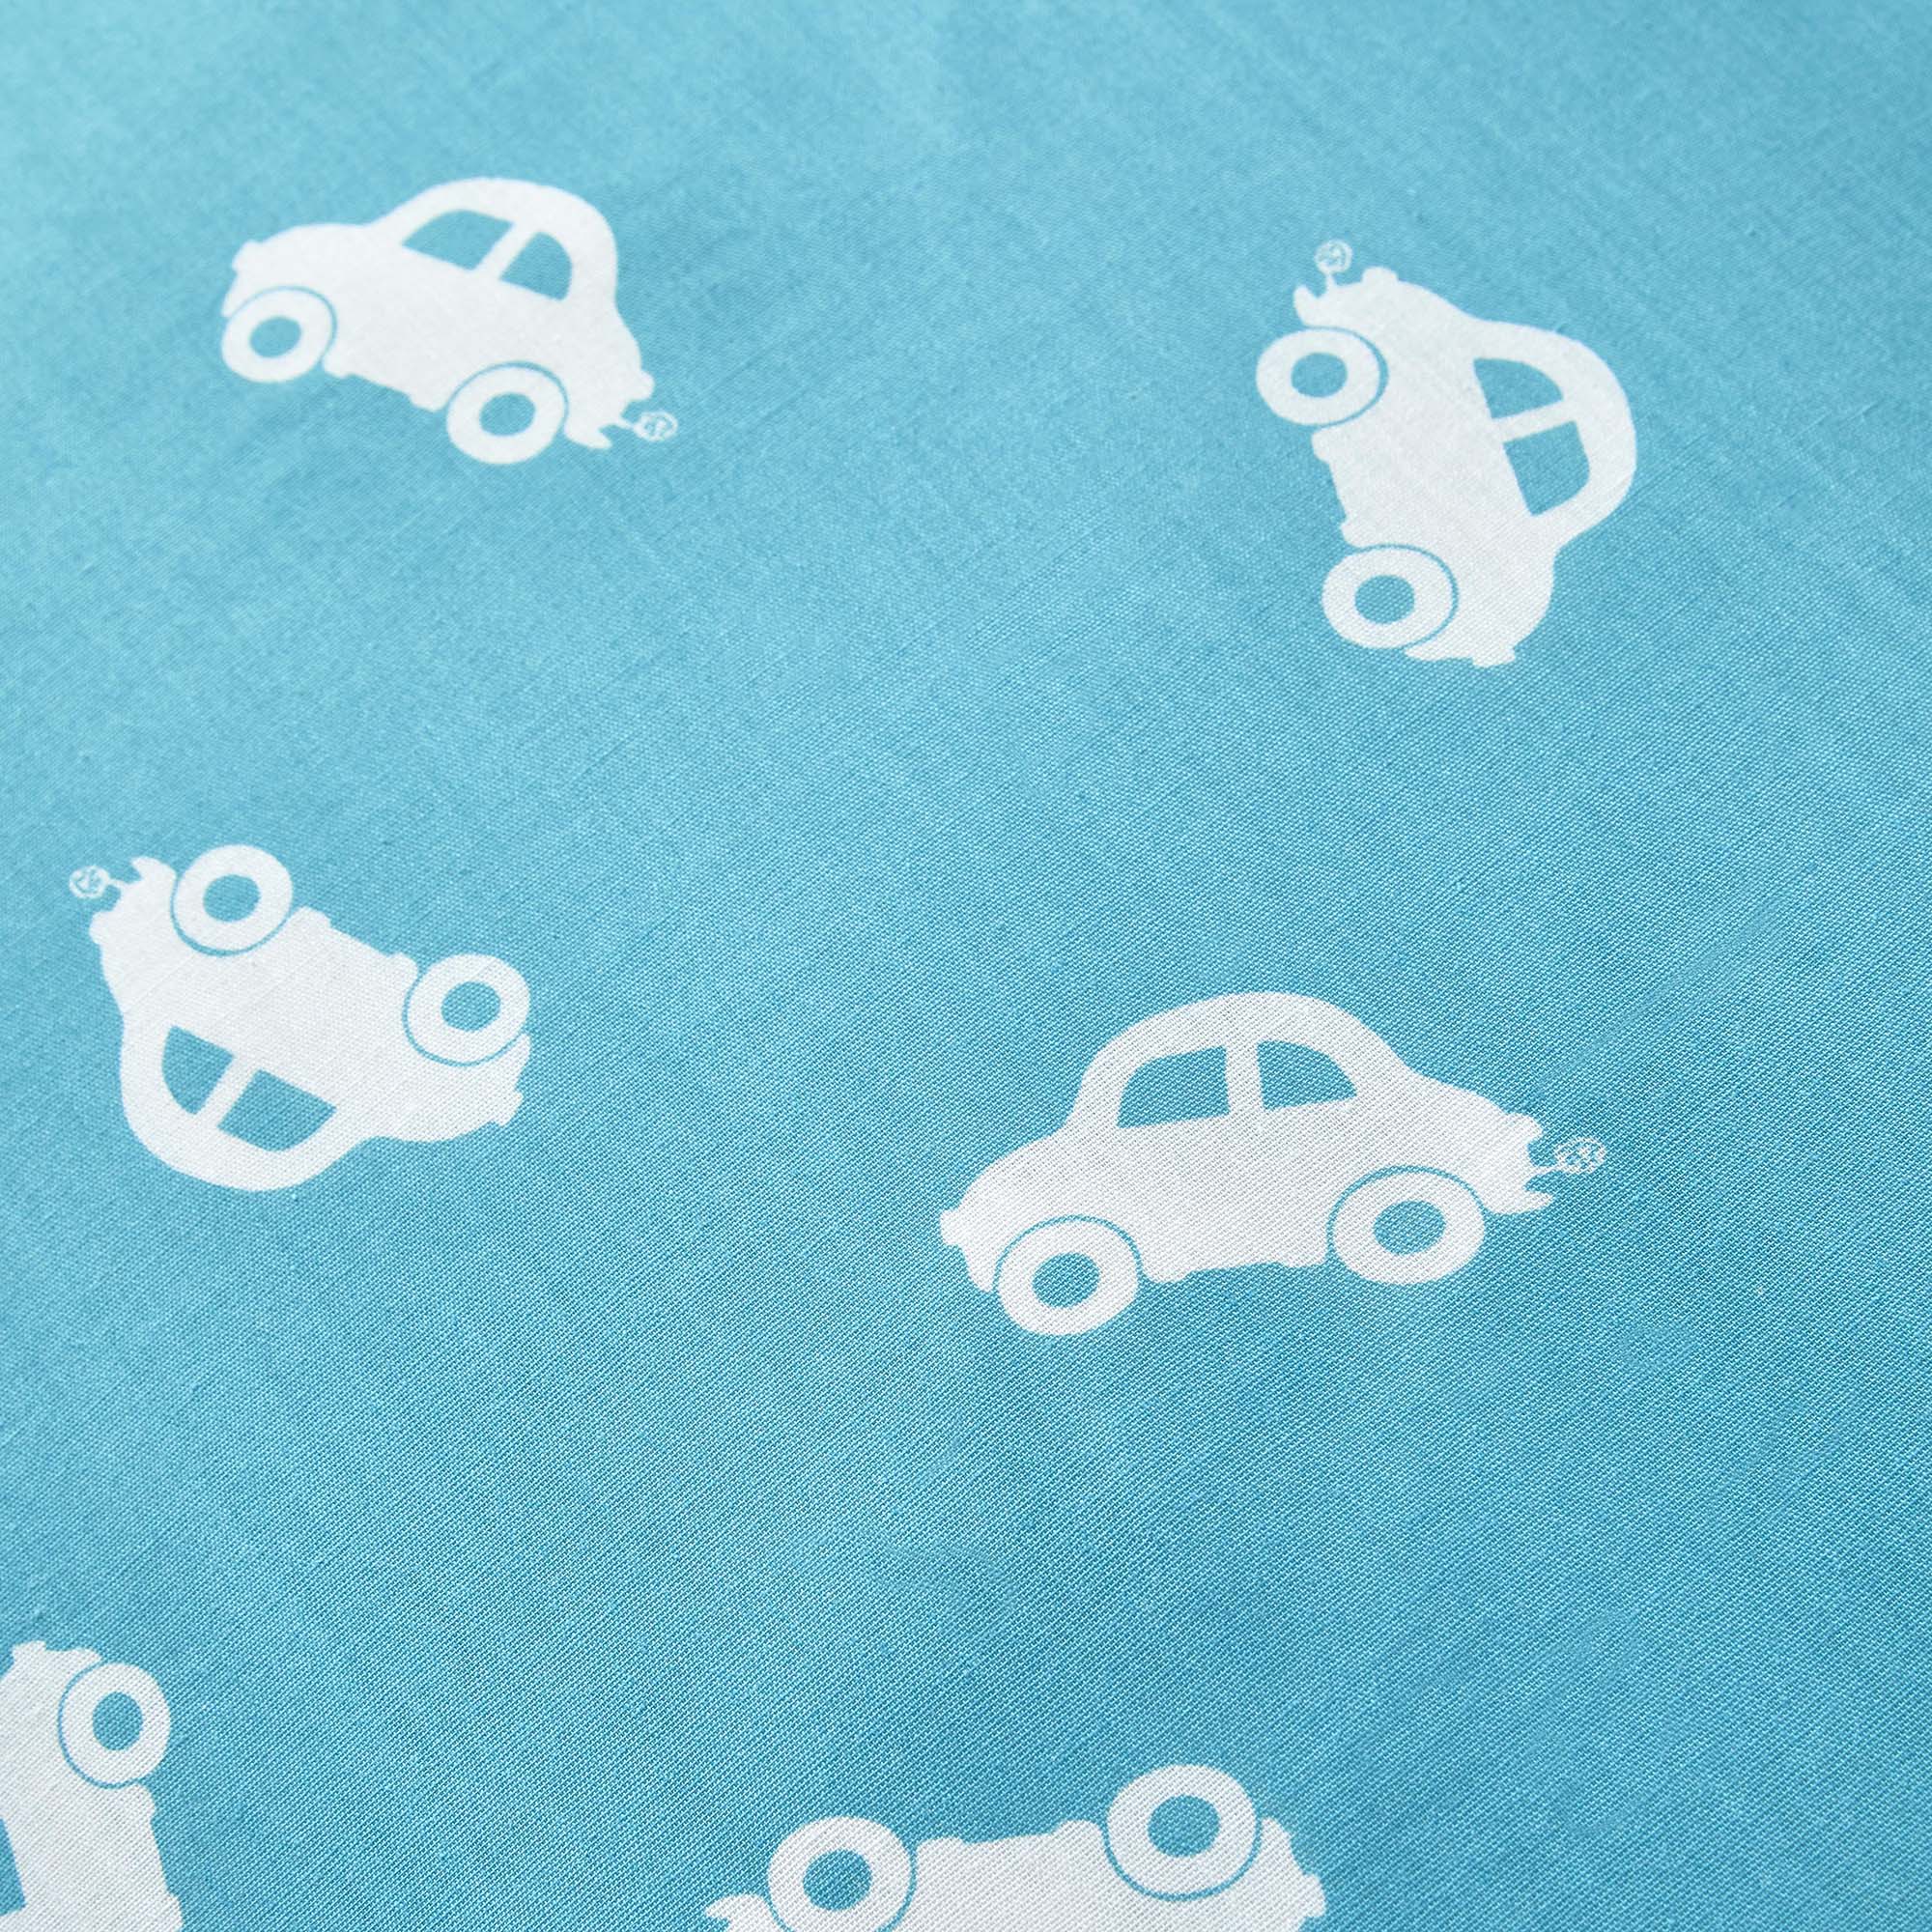 Little Transport - Glow in the Dark Duvet Cover Set, Curtains & Fitted Sheets in Grey - by Bedlam